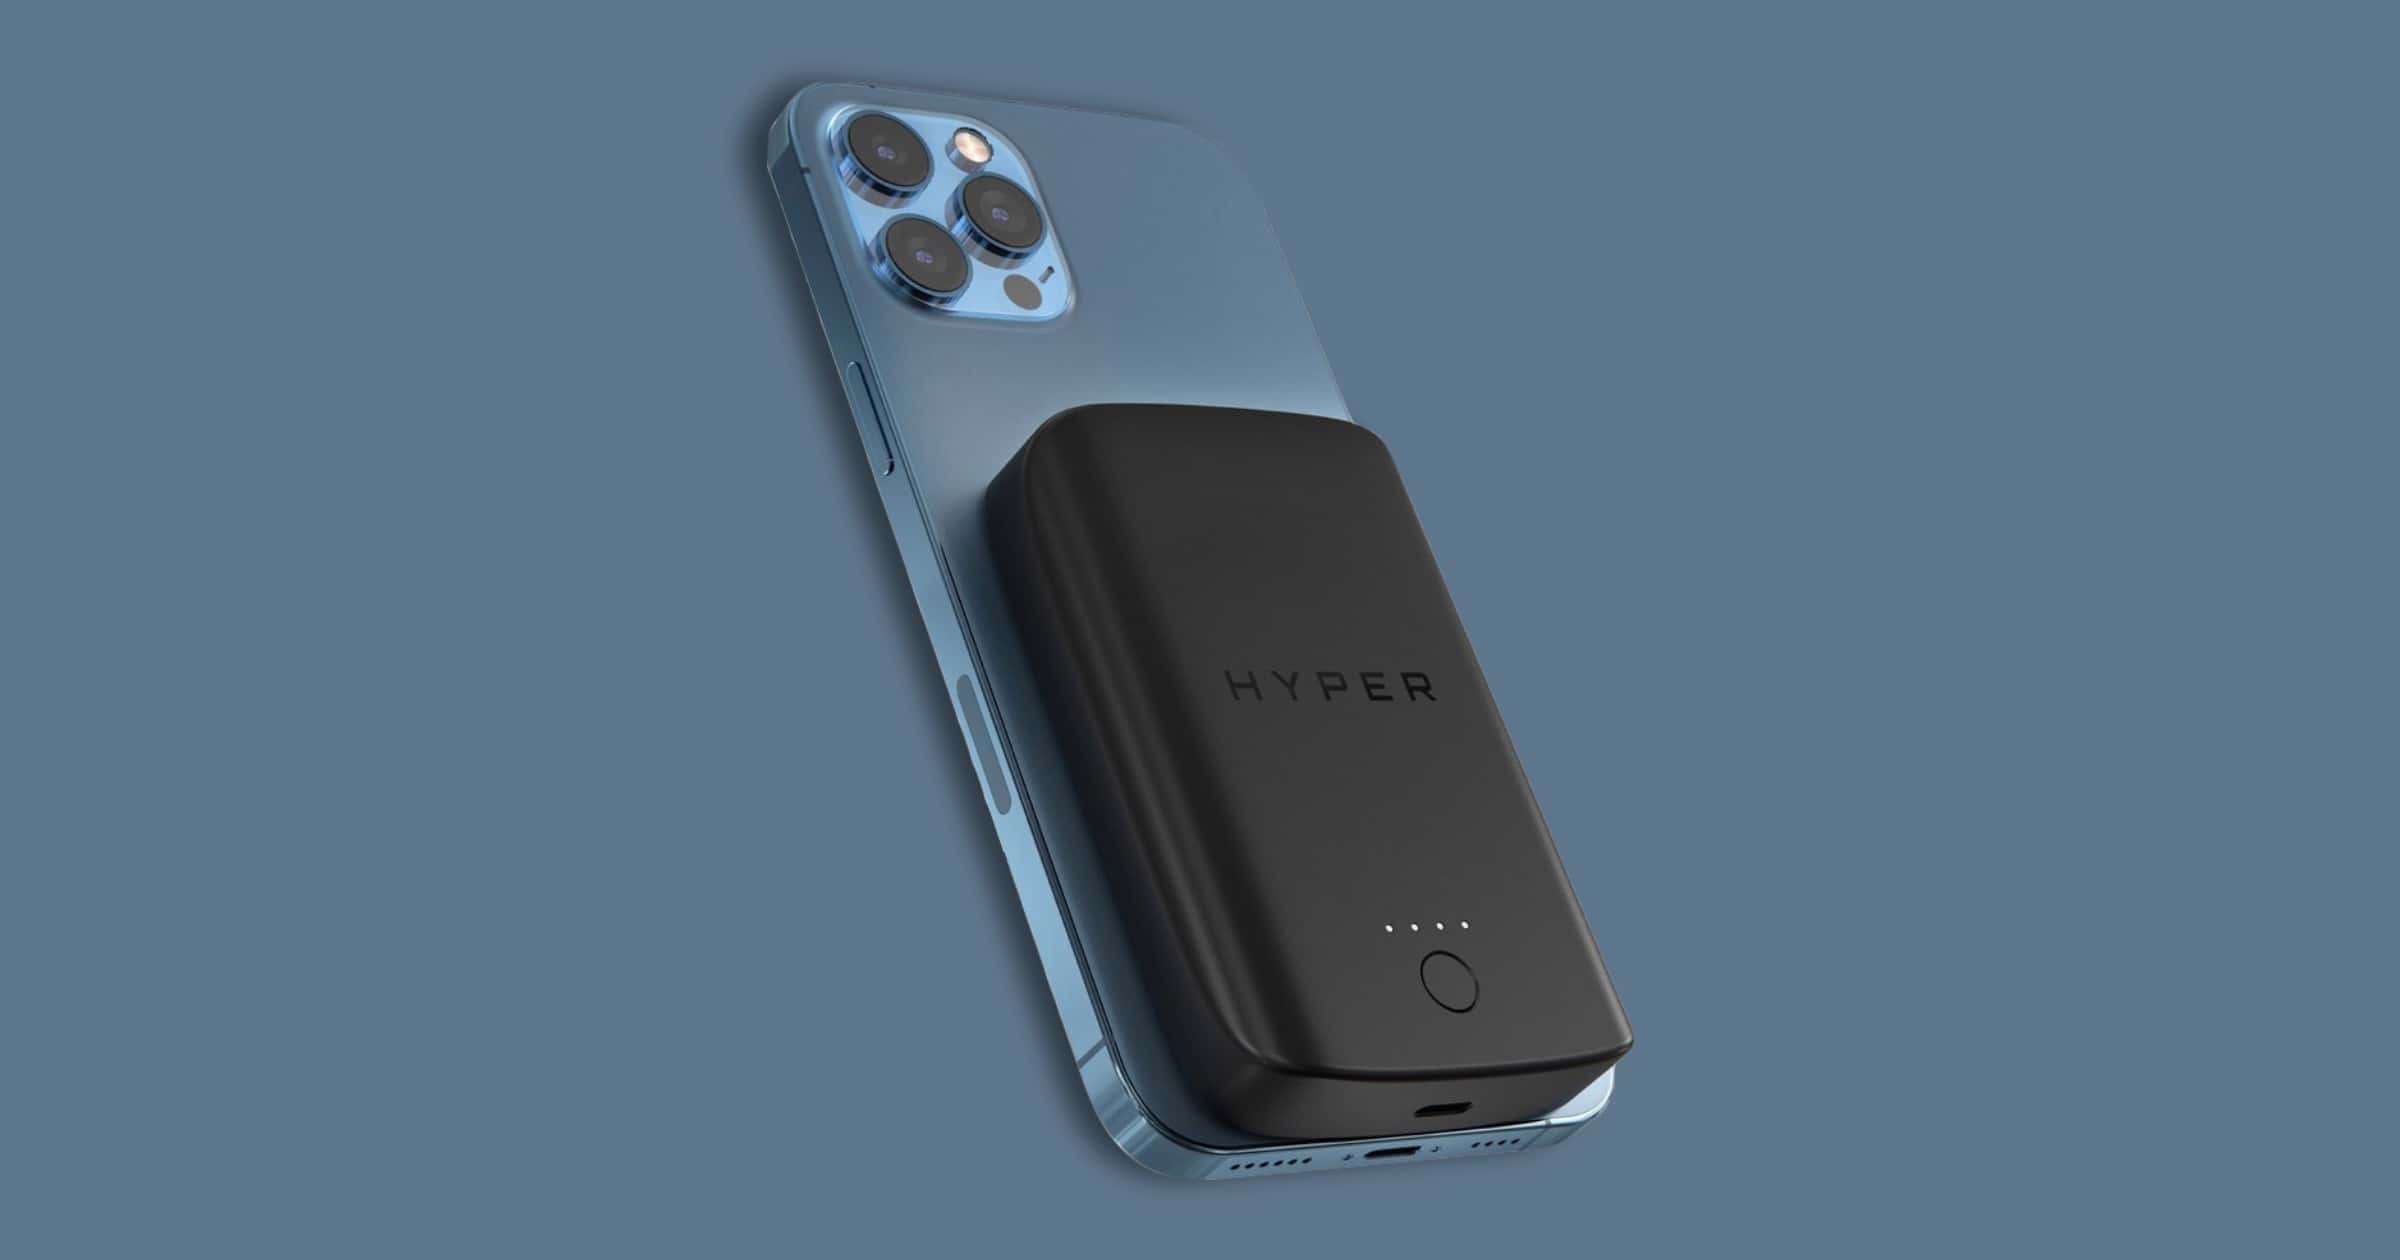 HYPER Launches iPhone 12 MagSafe Battery Pack